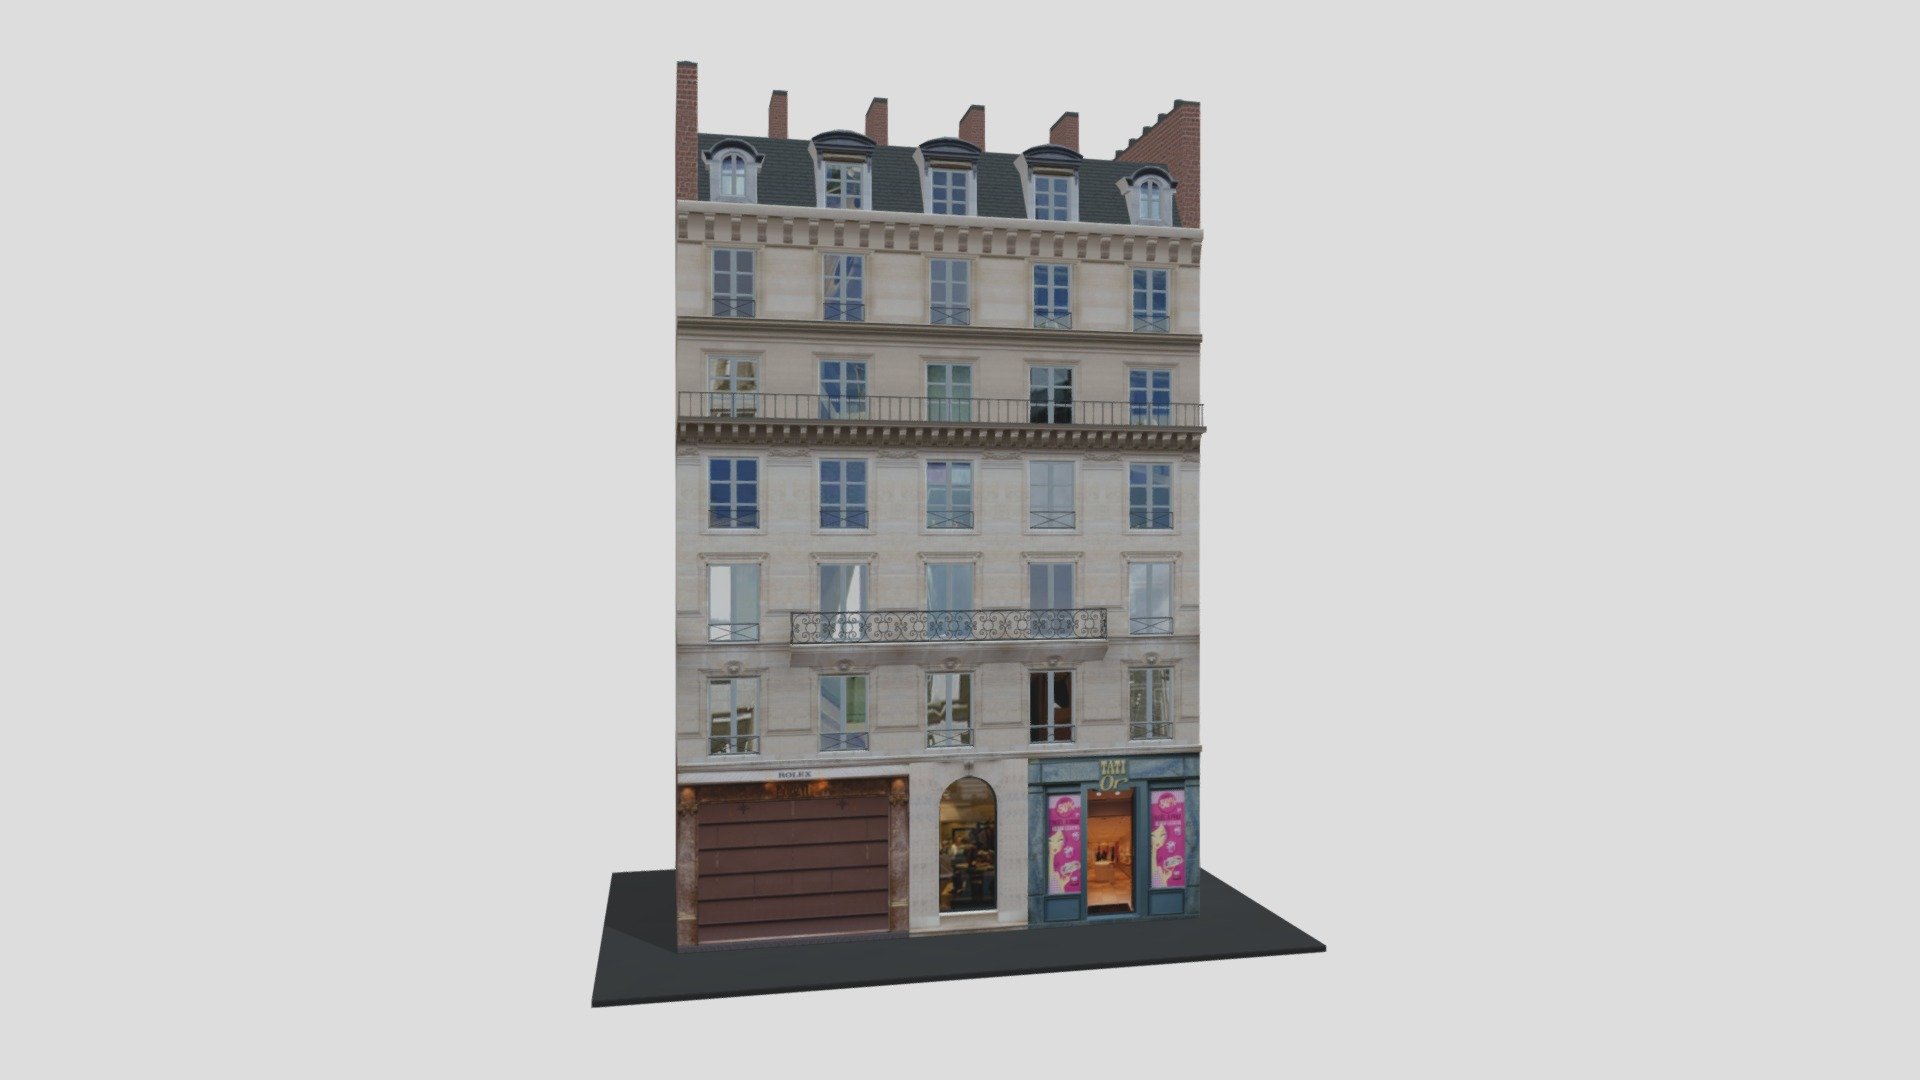 Typical Parisian Apartment Building 30
Originally created with 3ds Max 2015 and rendered in V-Ray 3.0. 

Total Poly Counts:
Poly Count = 15996
Vertex Count = 17869

https://nuralam3d.blogspot.com/2021/09/typical-parisian-apartment-building-30.html - Typical Parisian Apartment Building 30 - 3D model by nuralam018 3d model